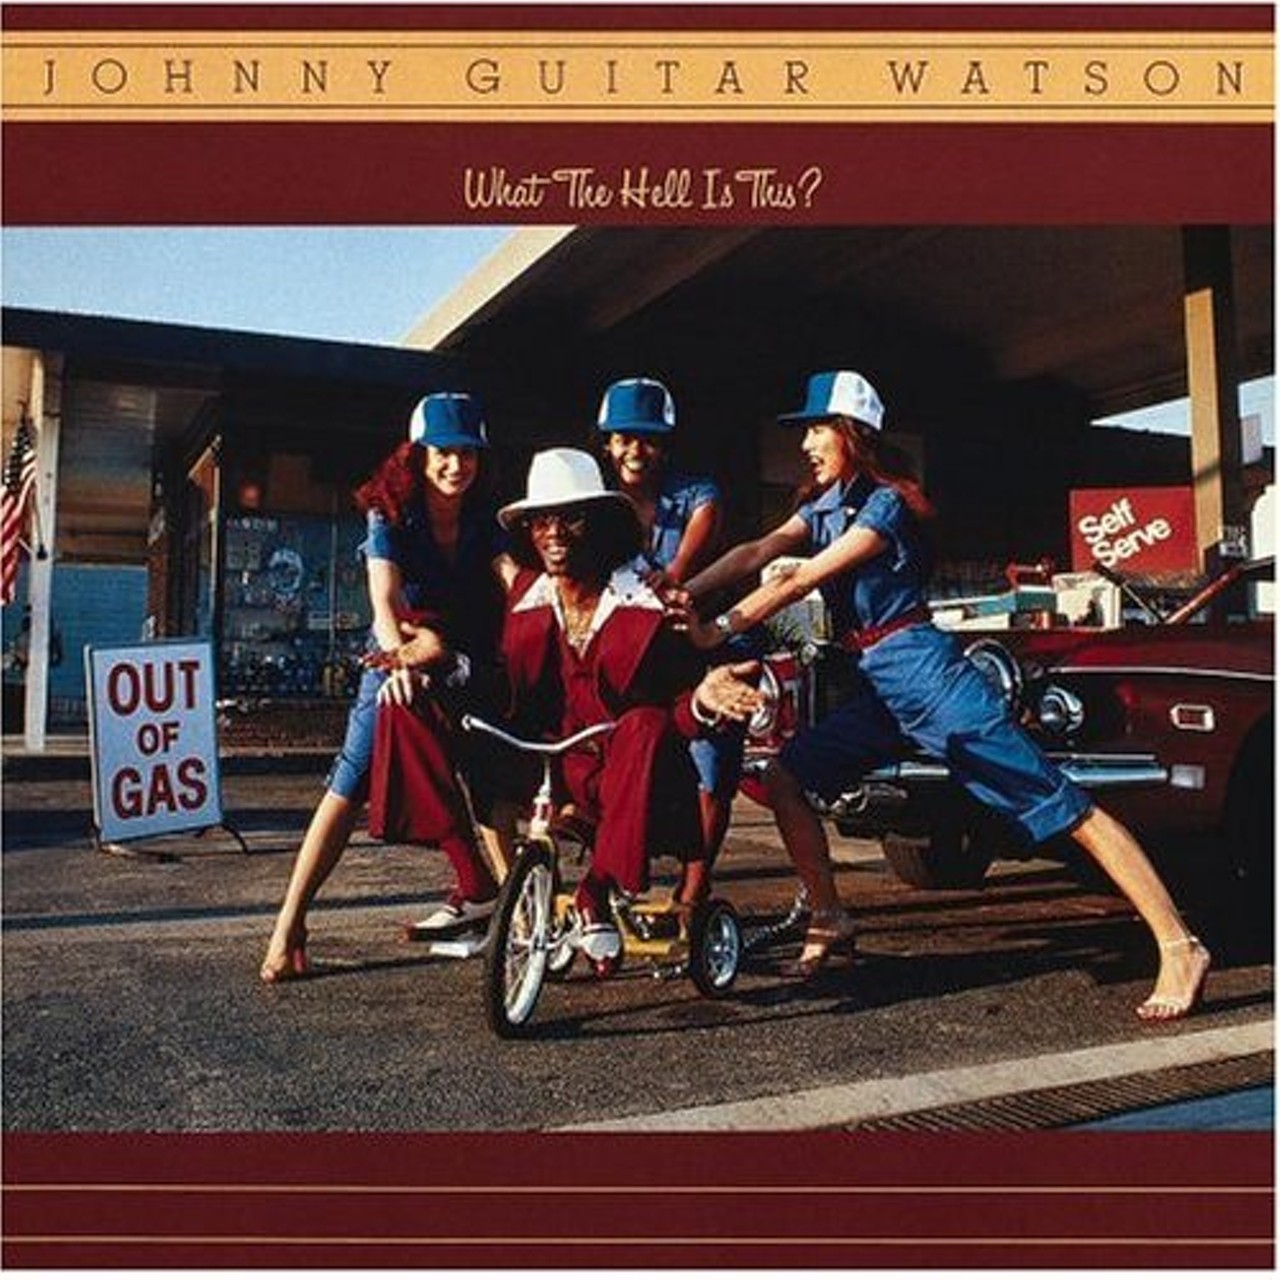 Johnny &ldquo;Guitar&rdquo; Watson: What the Hell is This? -- &hellip;Twice. It looks like his luck has improved if he can trade in his mama as a rickshaw driver for three hotties.